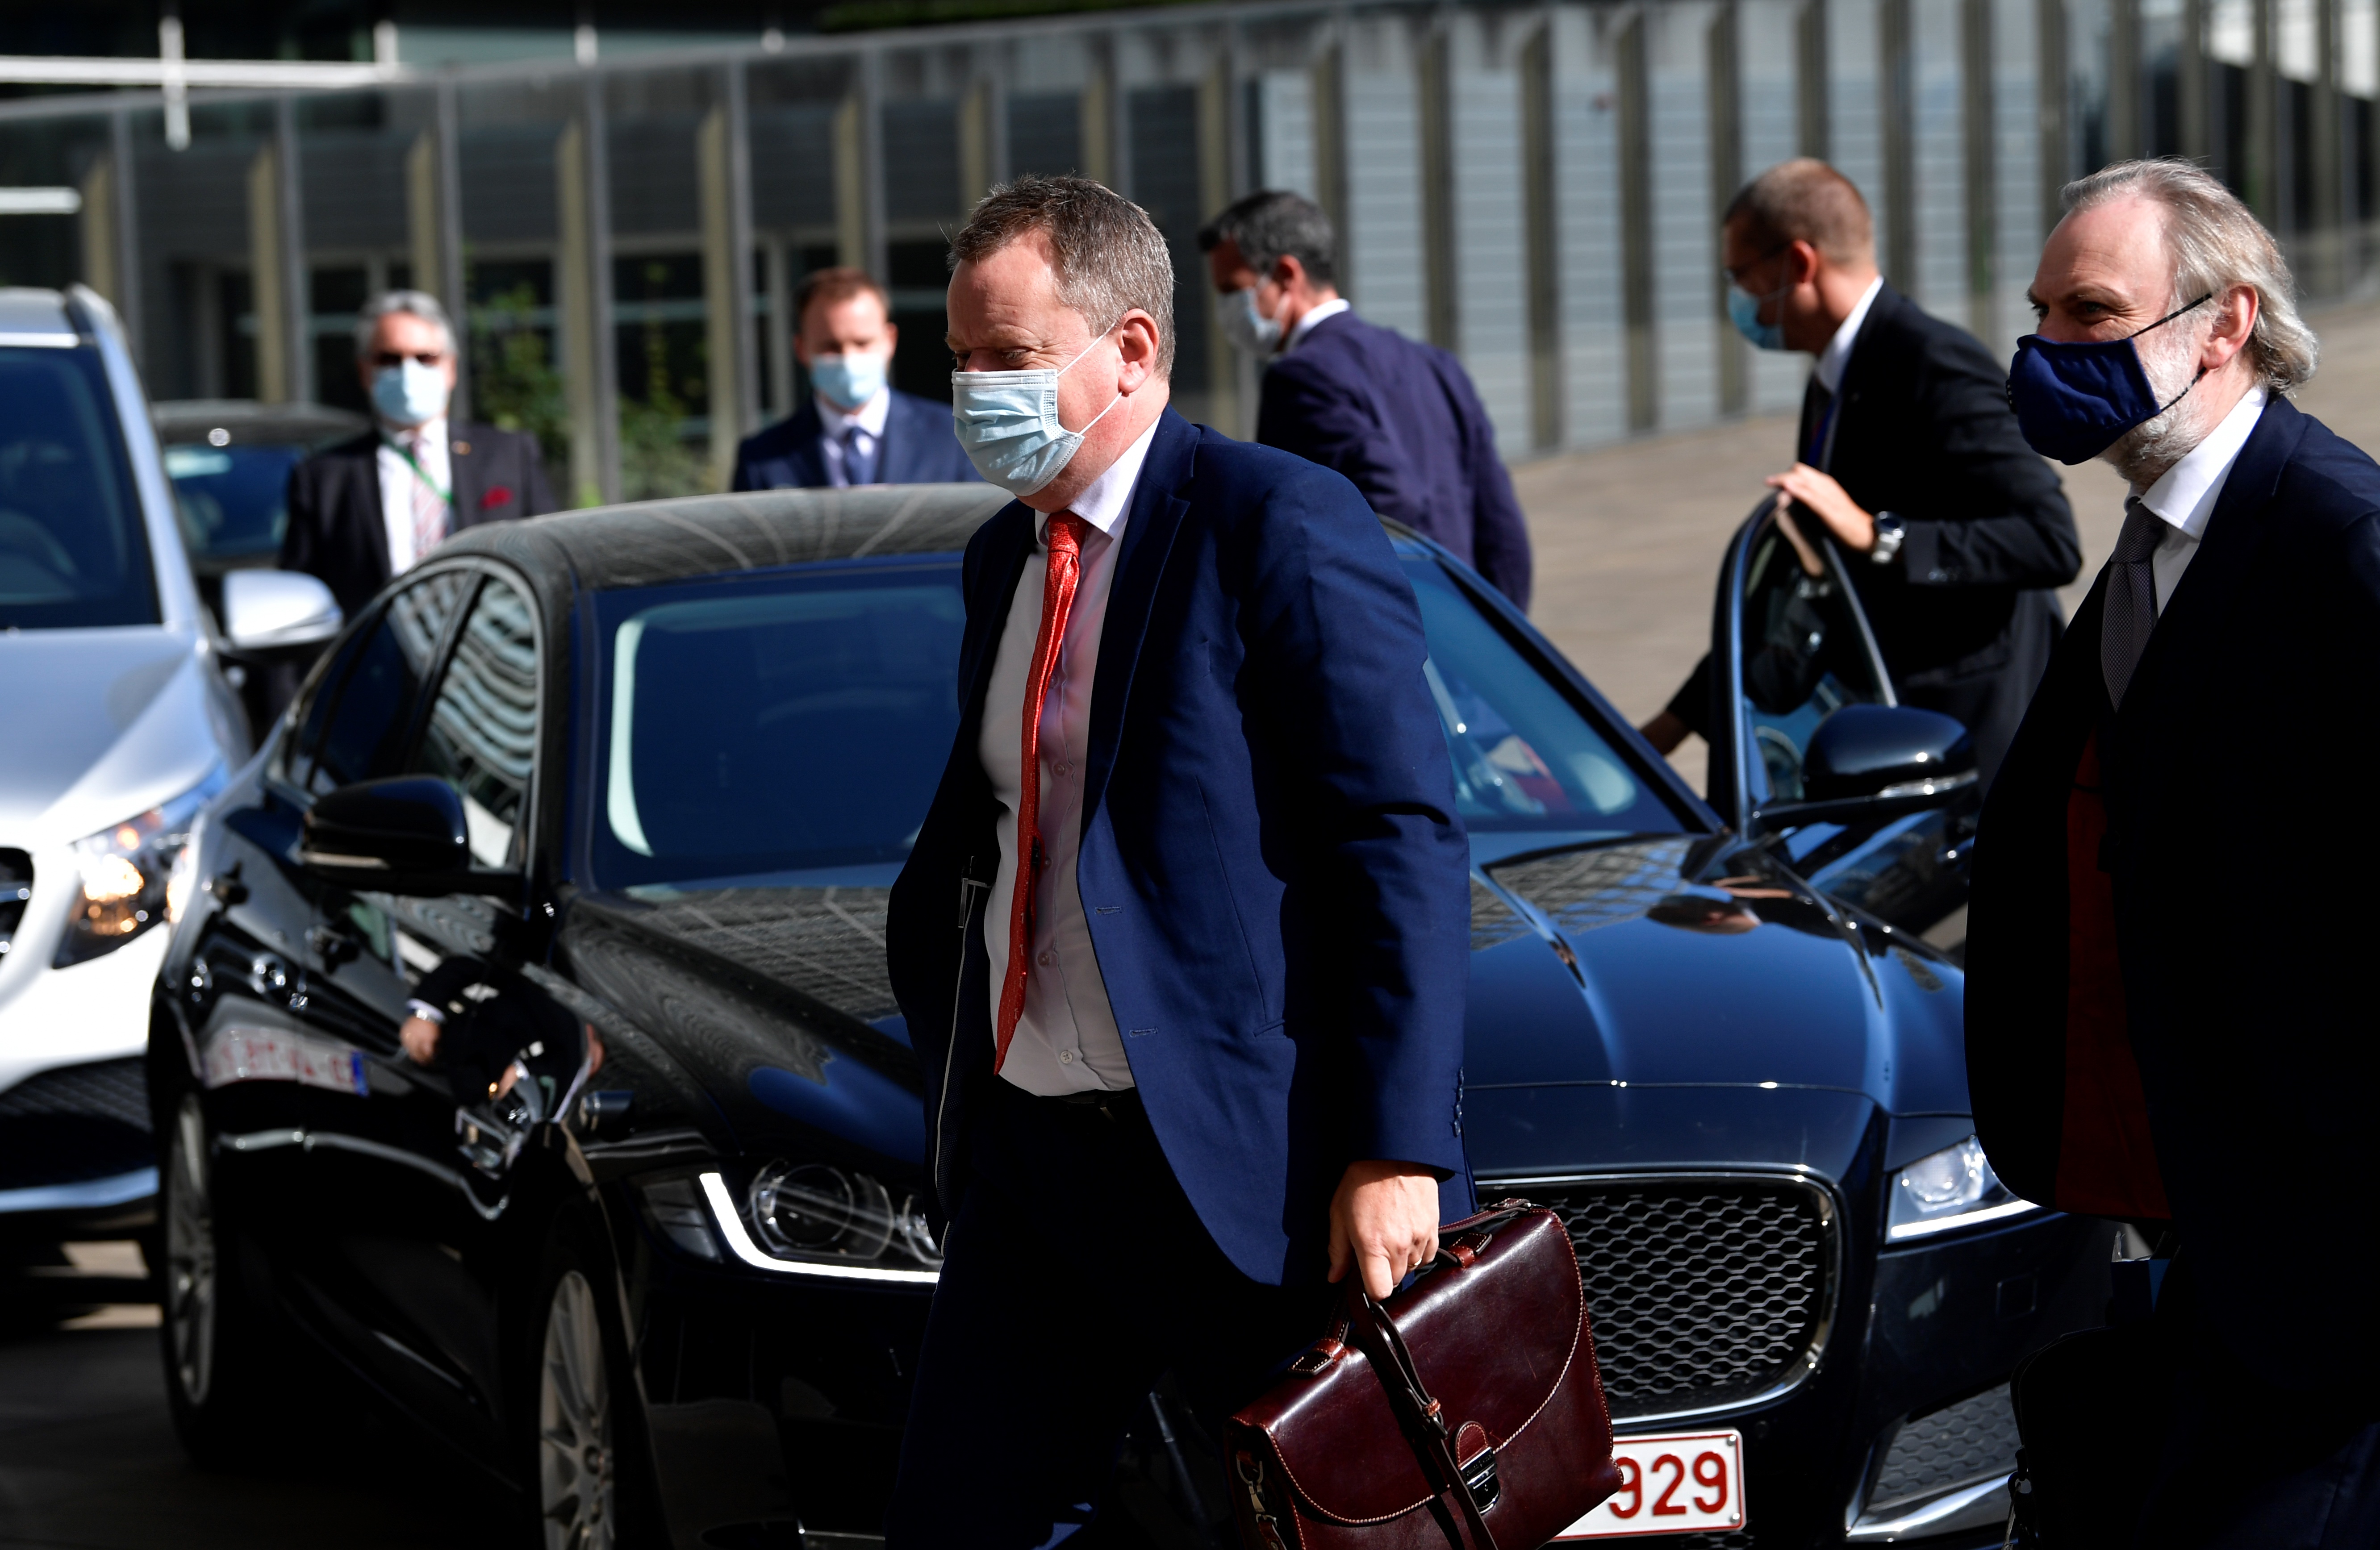 Britain&#039;s chief Brexit negotiator David Frost (C) arrives to meet his EU counterpart for Brexit negotiations at the EU headquarters in Brussels on September 17, 2020. - The chief negotiators 